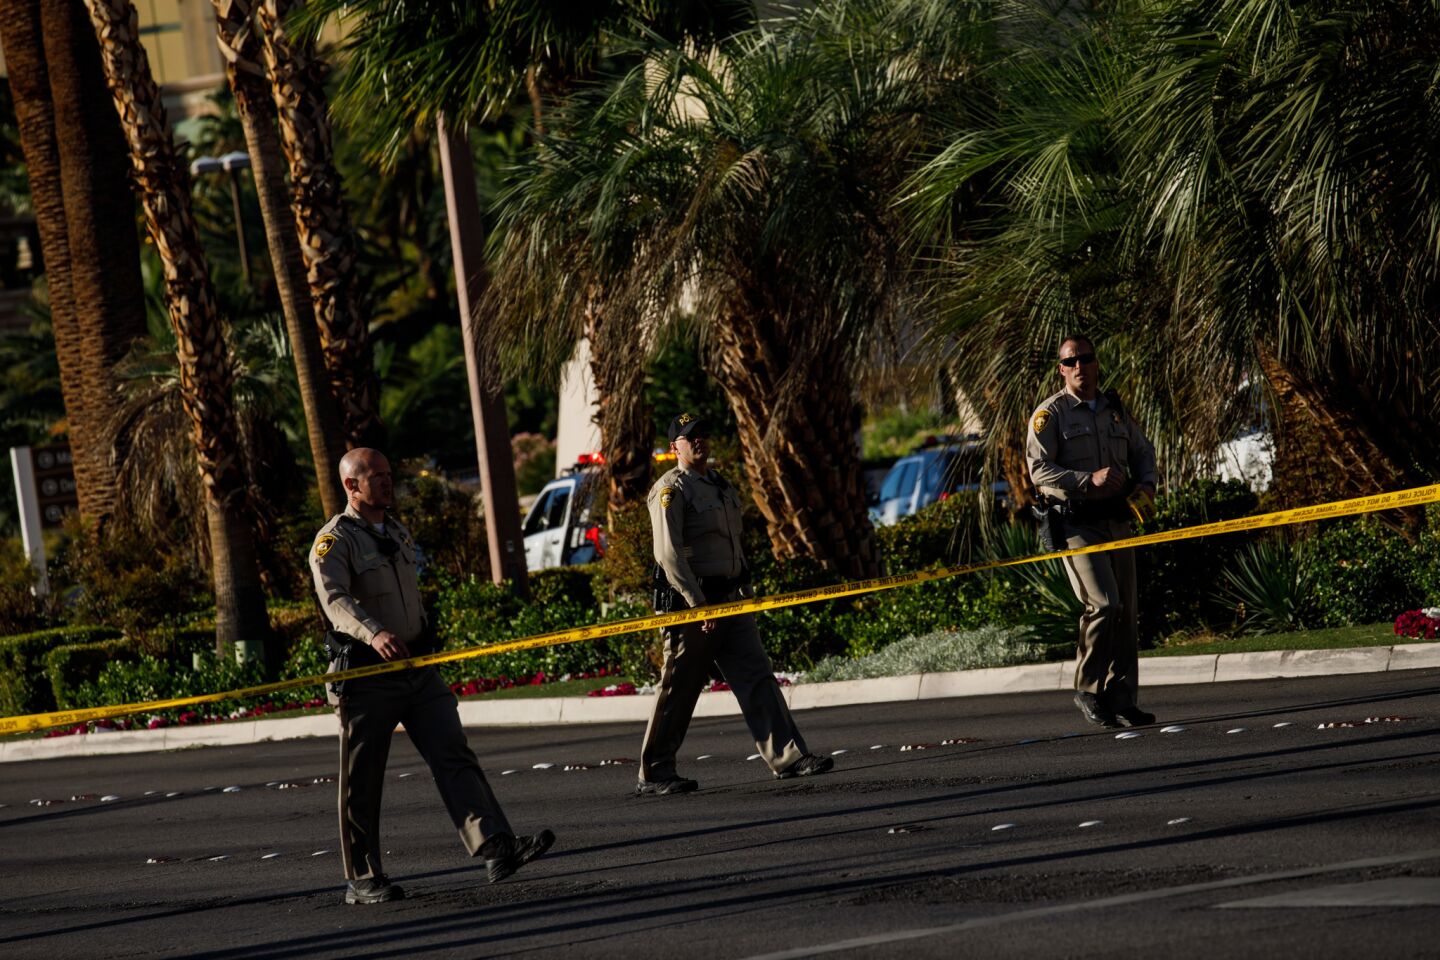 Law enforcement officers in Las Vegas on Monday cordon off a crime scene after a gunman opened fire from an upper story hotel room on a country music festival the night before.